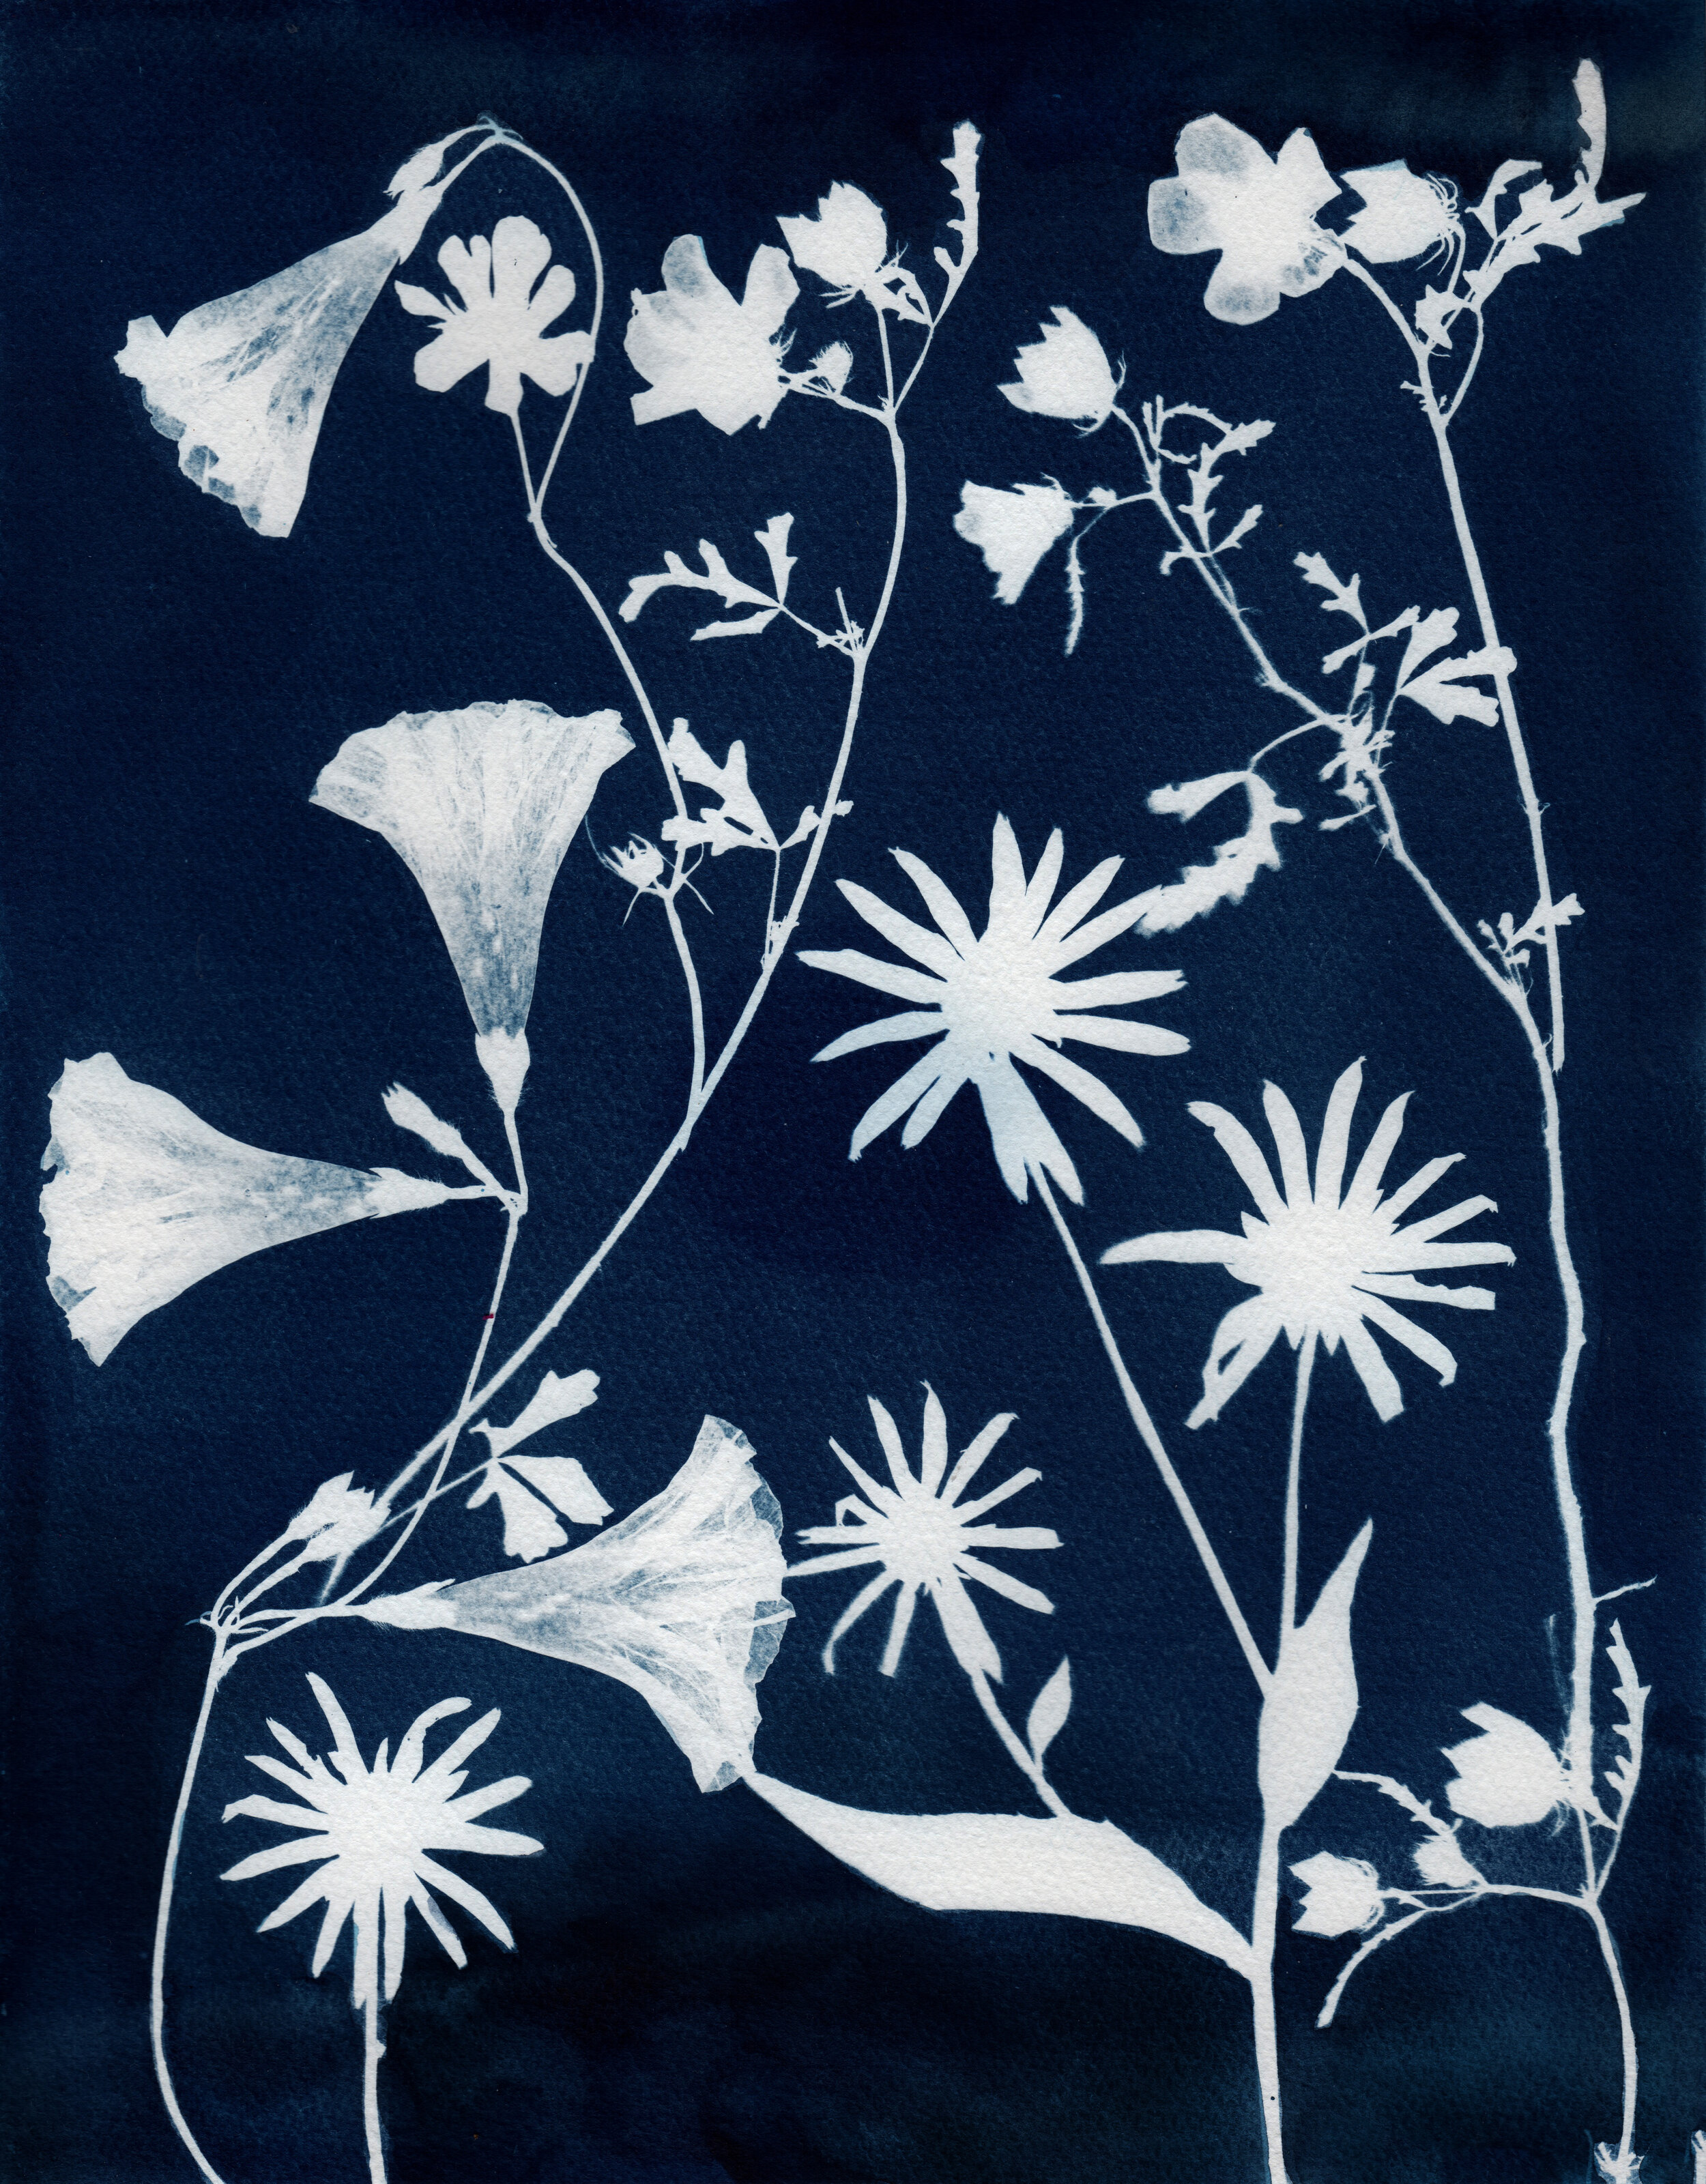  2020, 14" x 11" watercolor, gouache and cyanotype on watercolor paper 